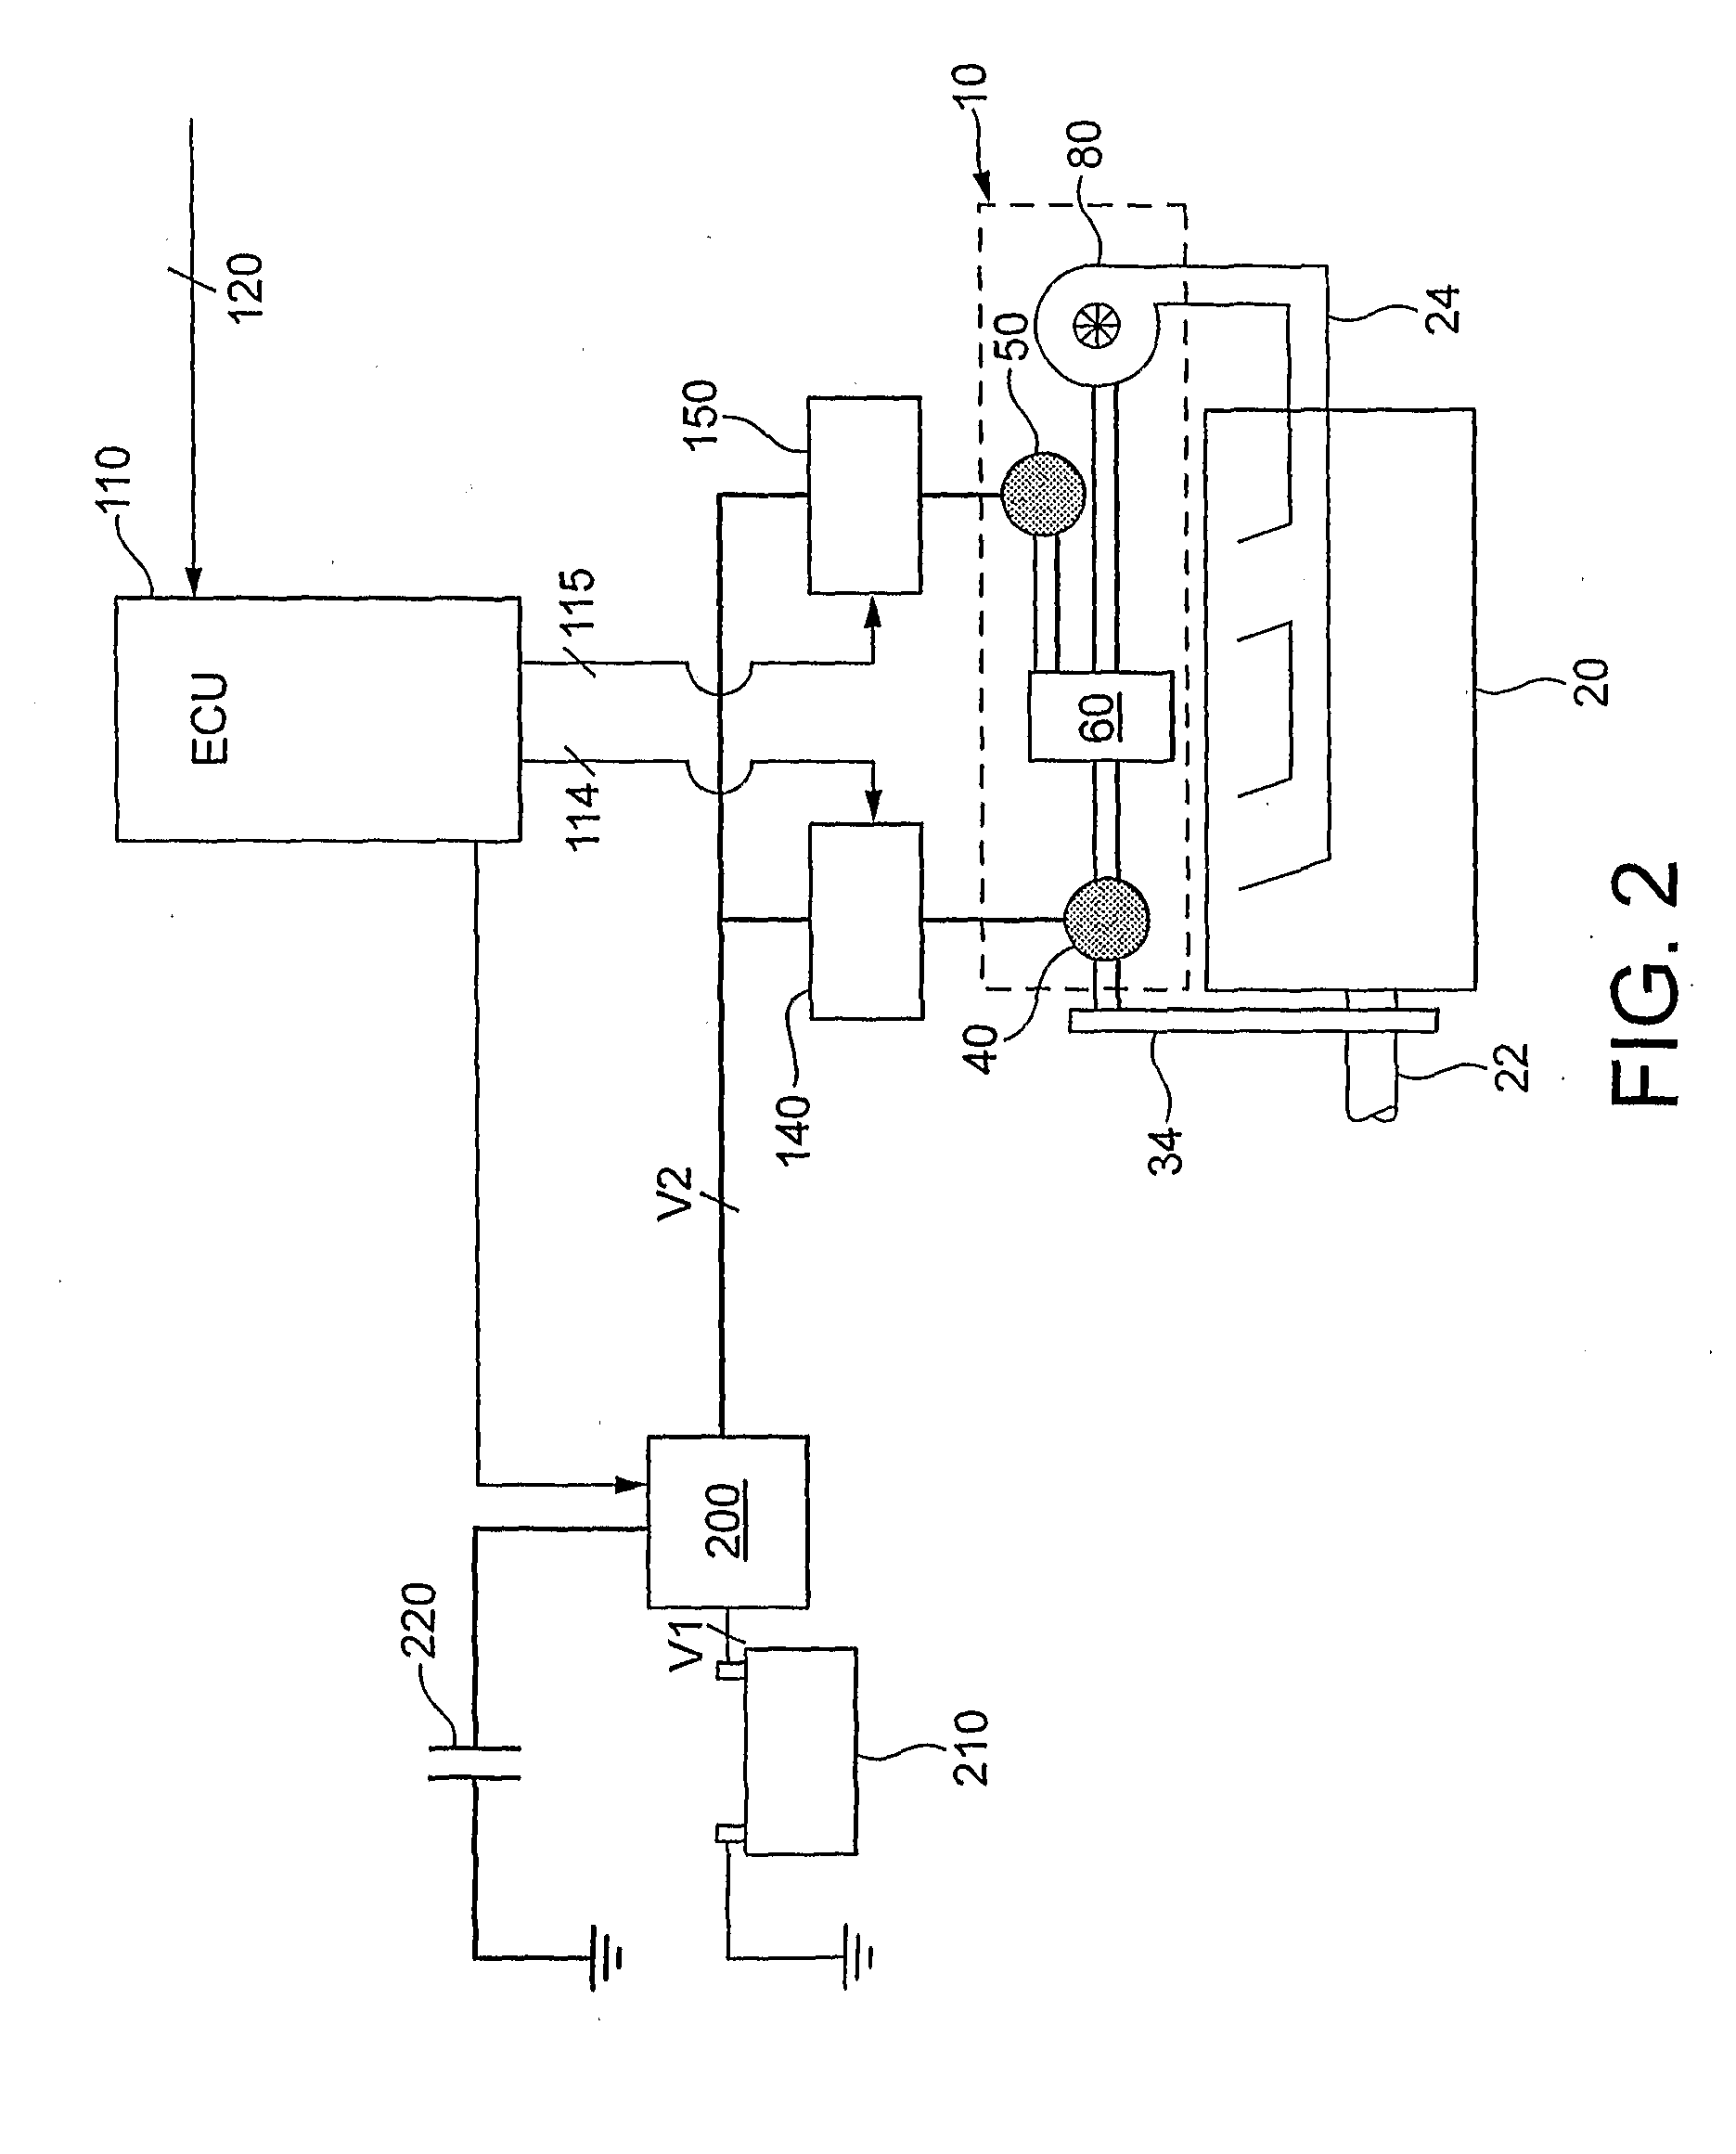 Method of operating a supercharger